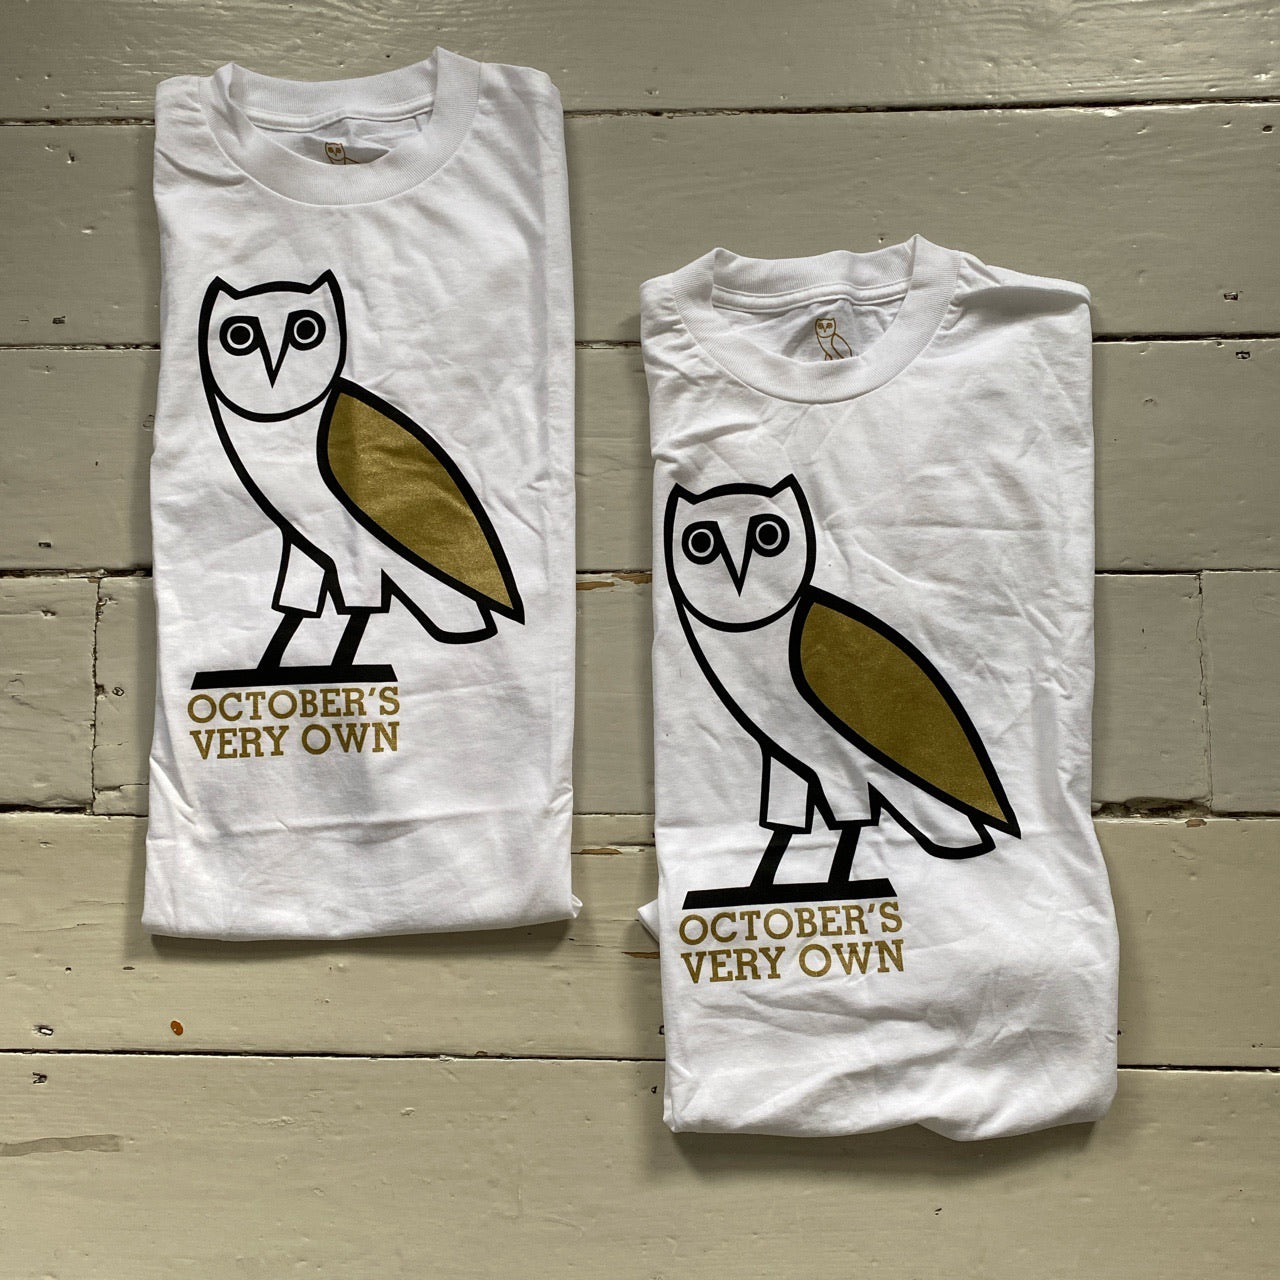 OVO Octobers Very Own Owl T-Shirt (Large)